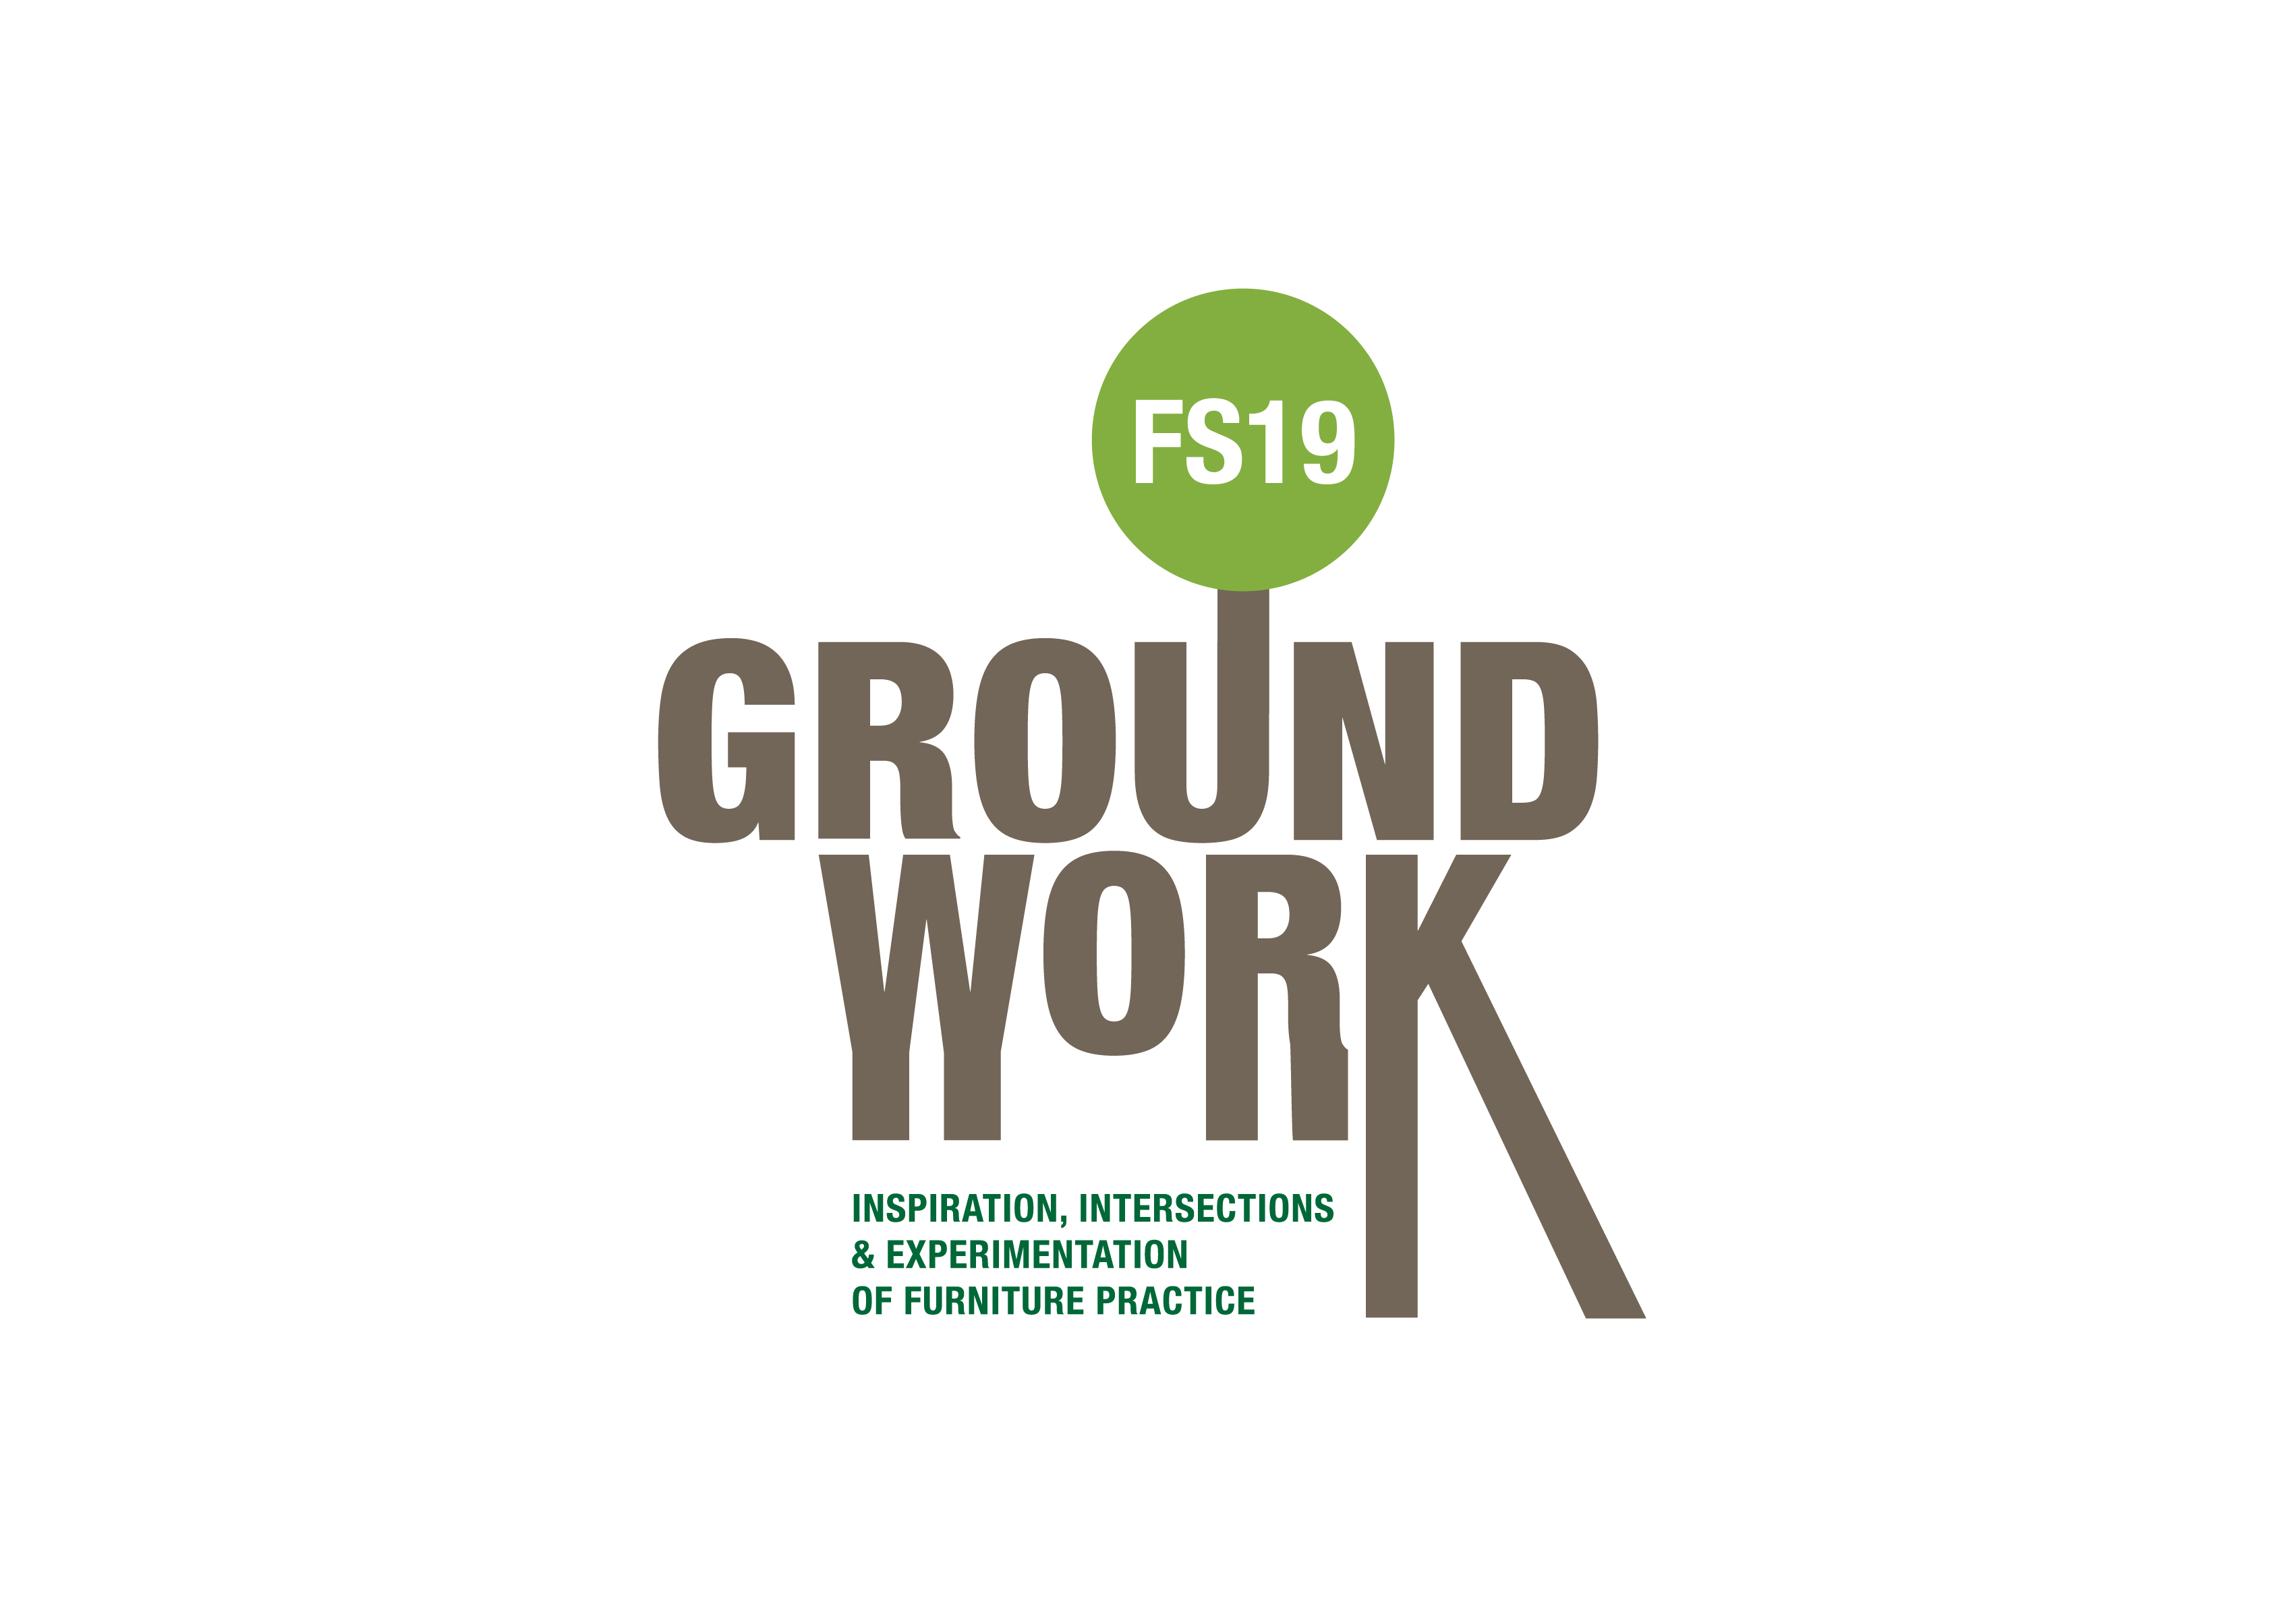 FS19: Furniture Society Annual conference